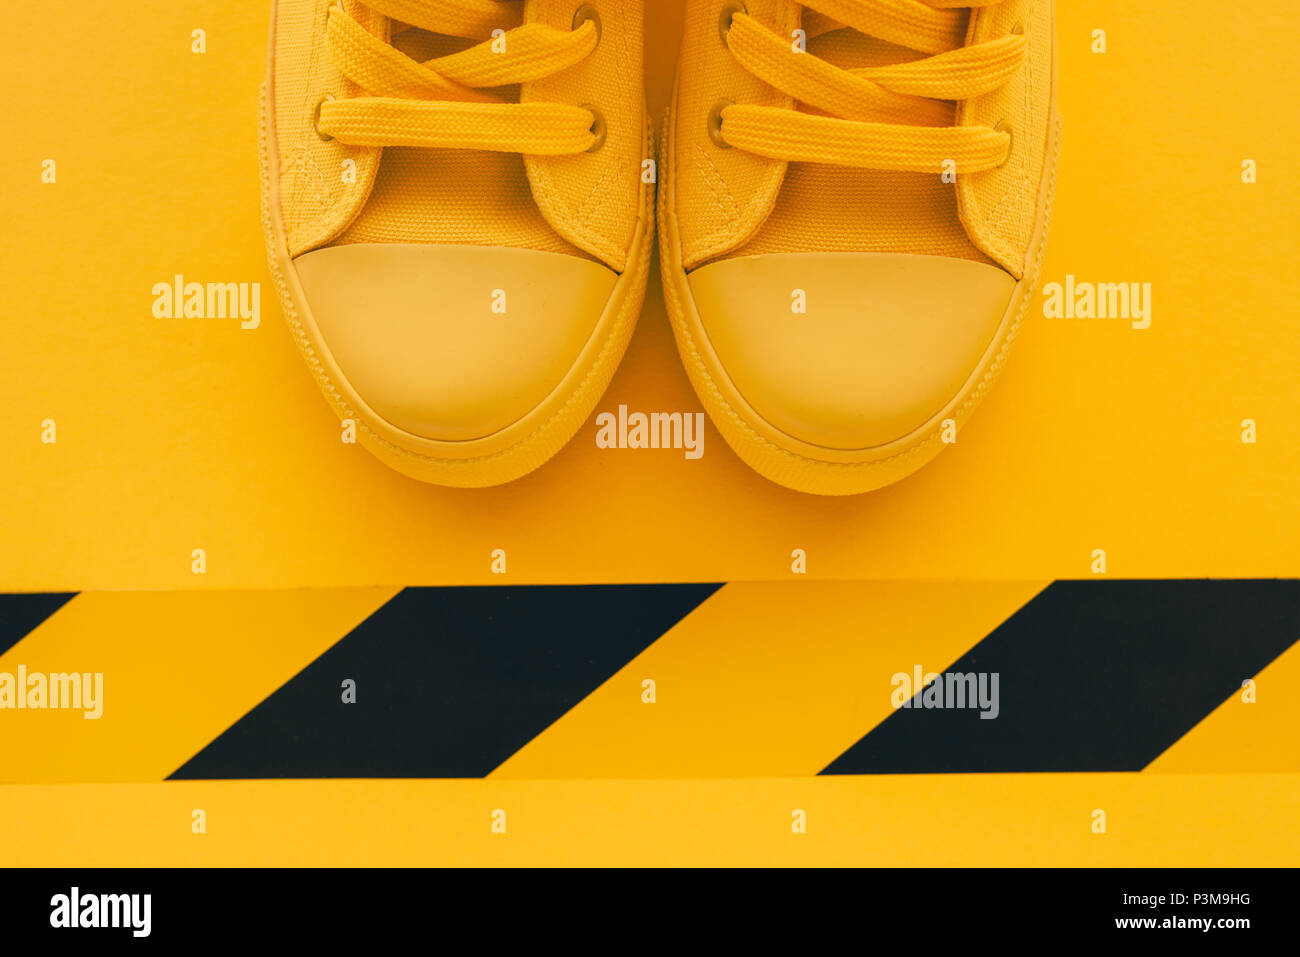 First in line young man queueing, conceptual overhead top view image of yellow sneakers waiting in line Stock Photo